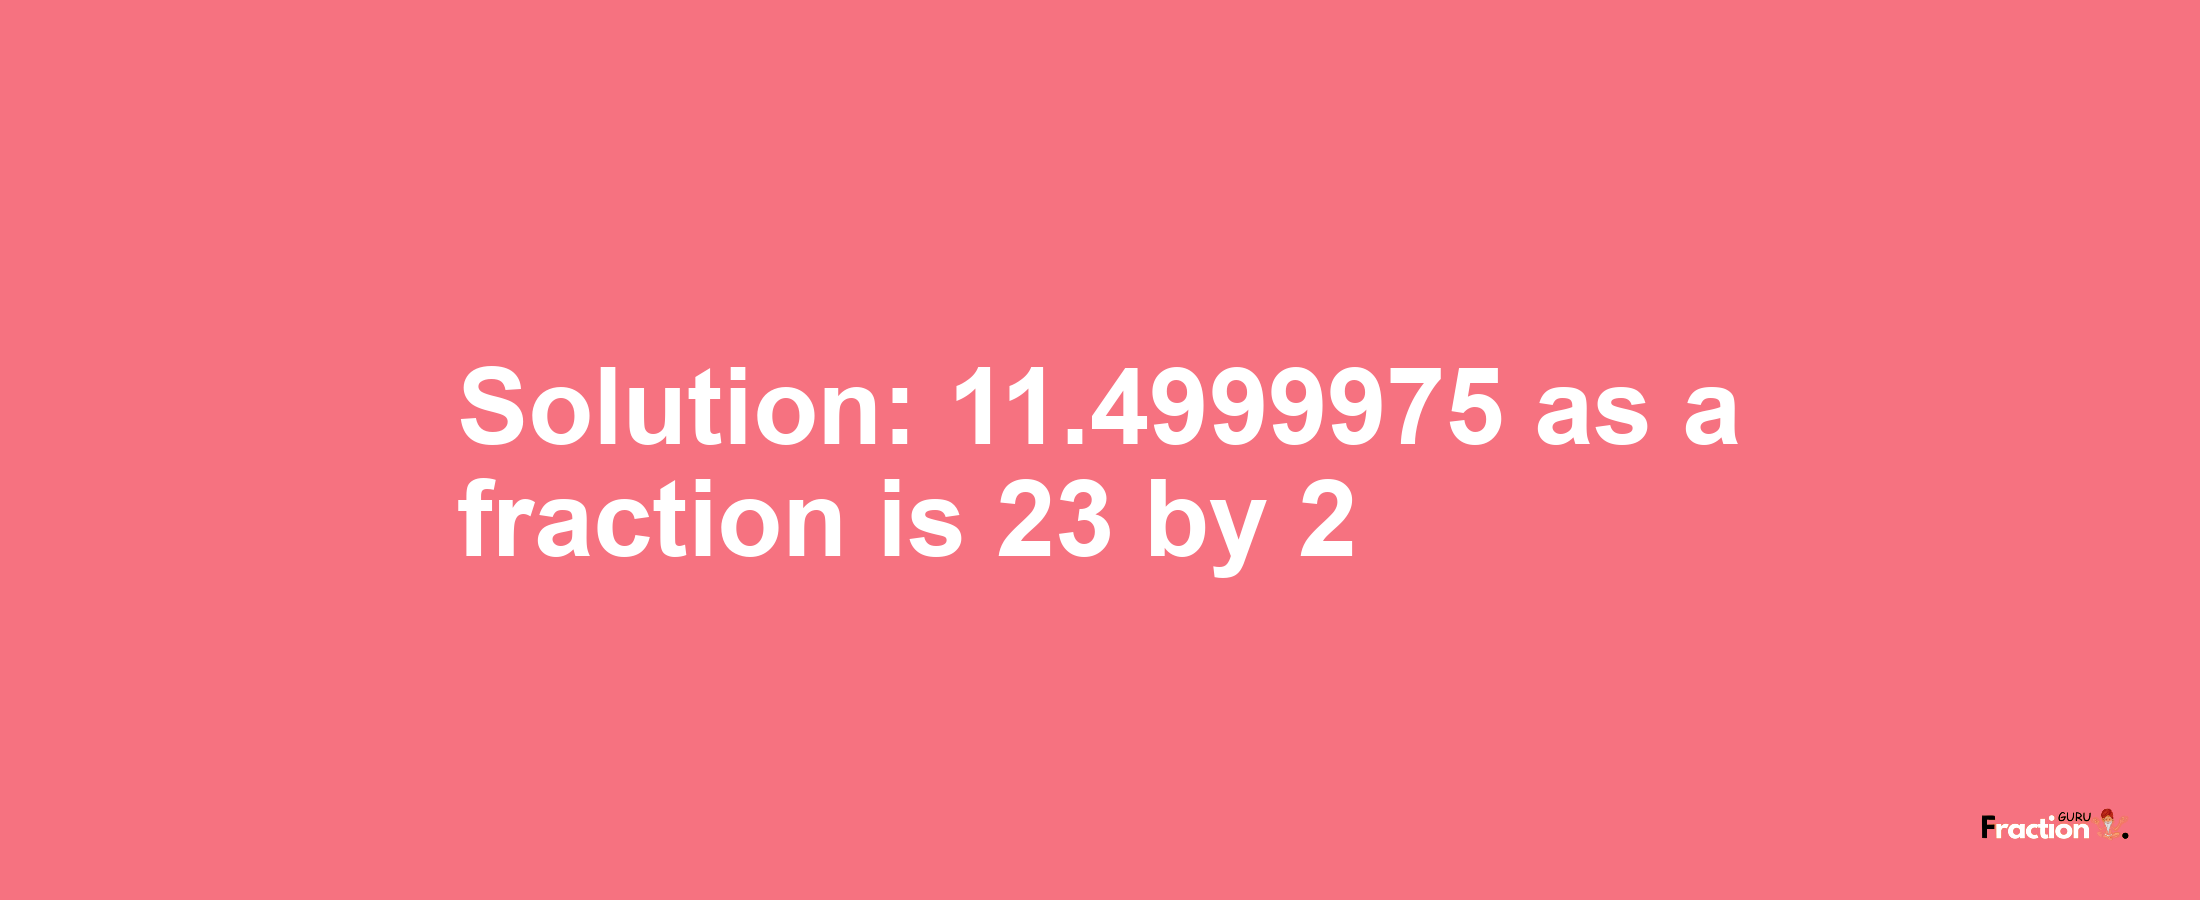 Solution:11.4999975 as a fraction is 23/2